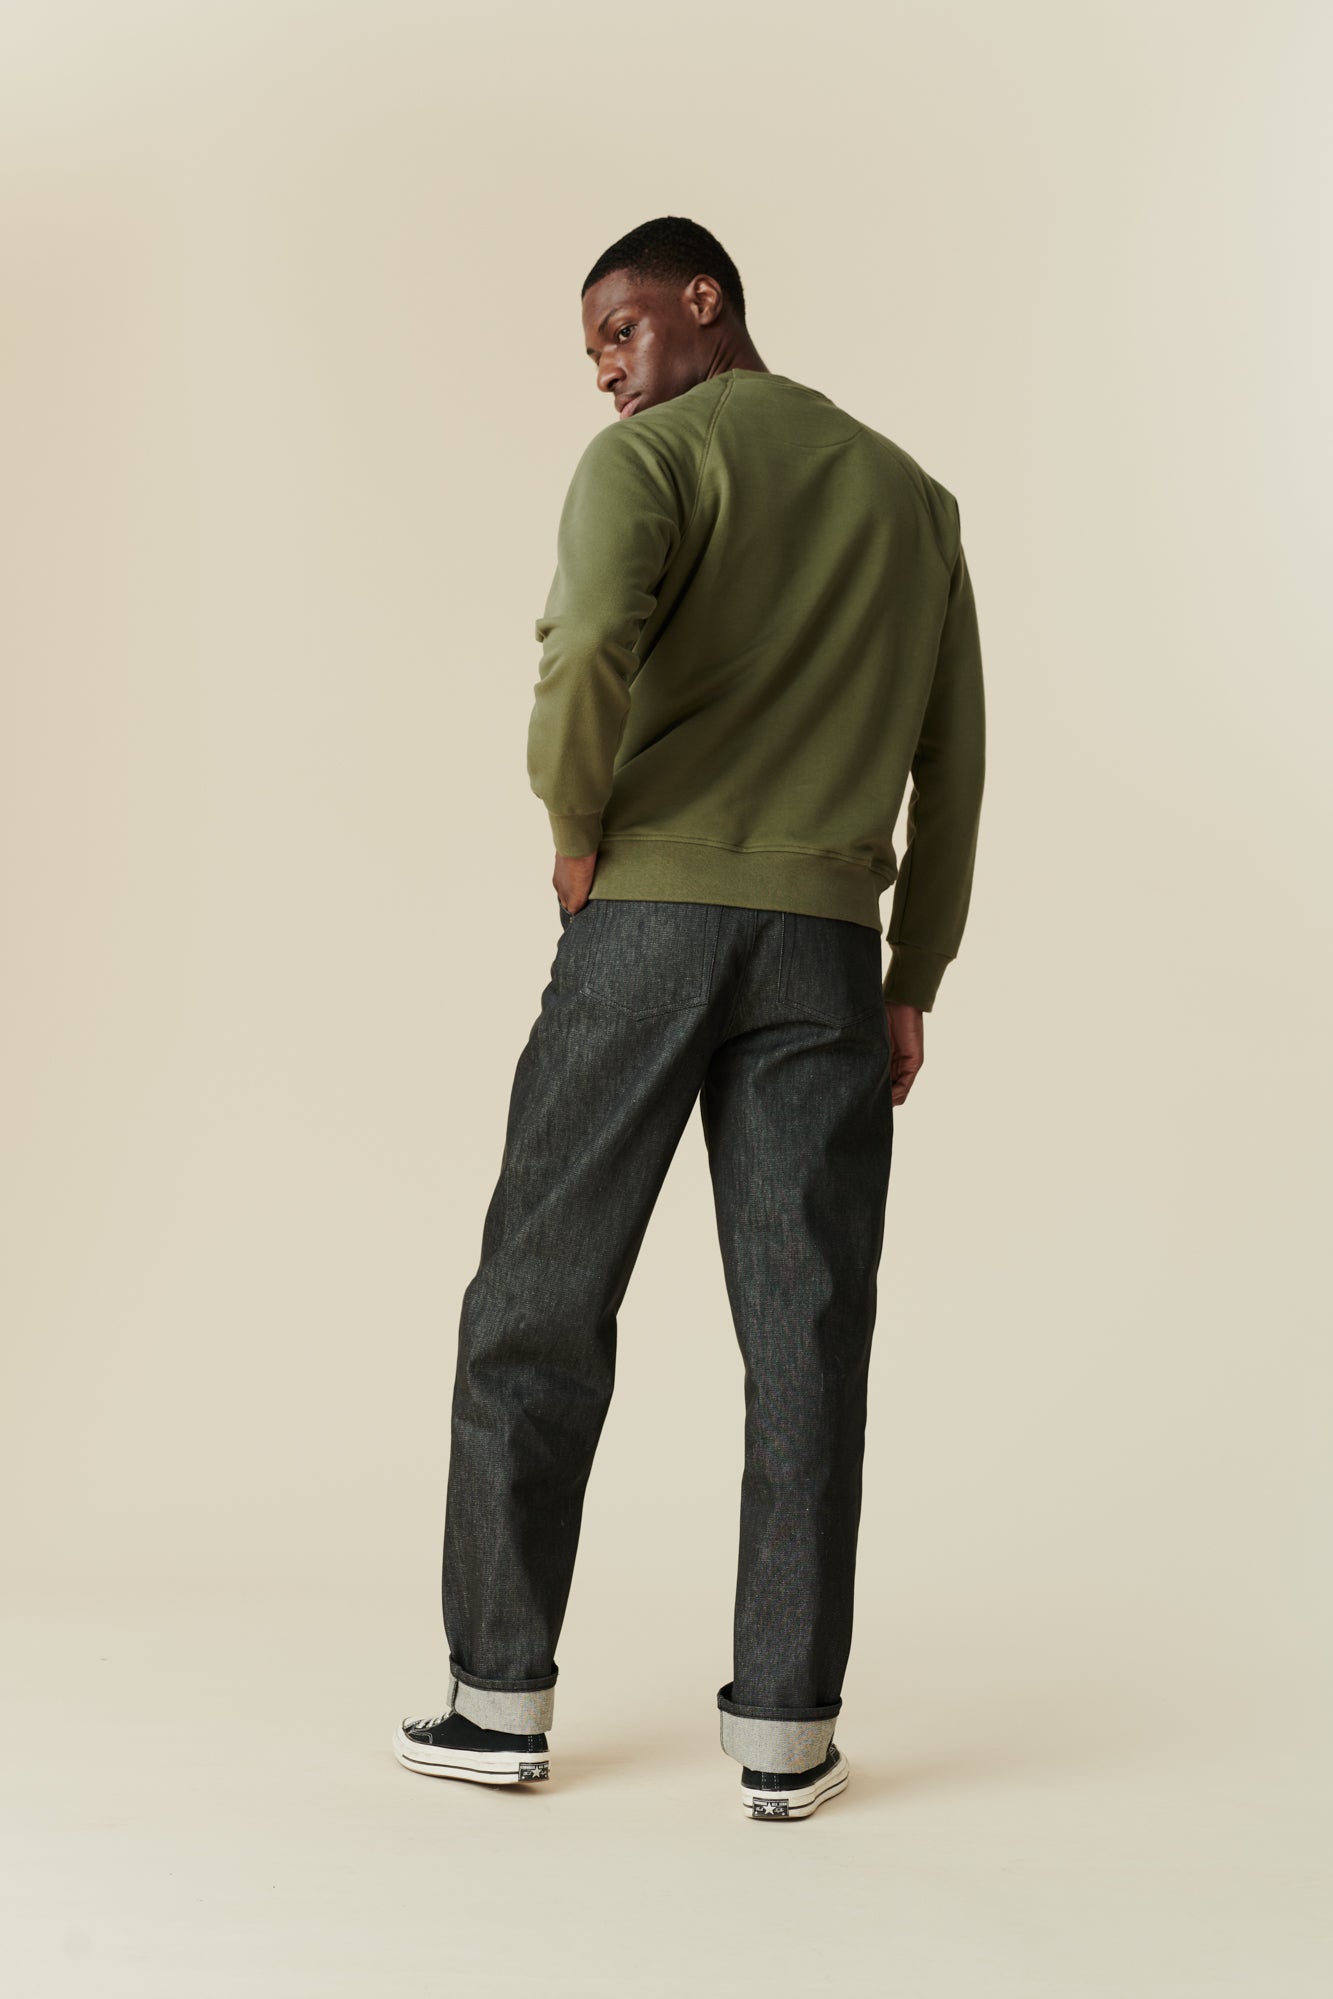 The back of black male wearing men's Chore jeans in black, wide leg and tapered fit with rolled hem, worn with olive green raglan sweatshirt